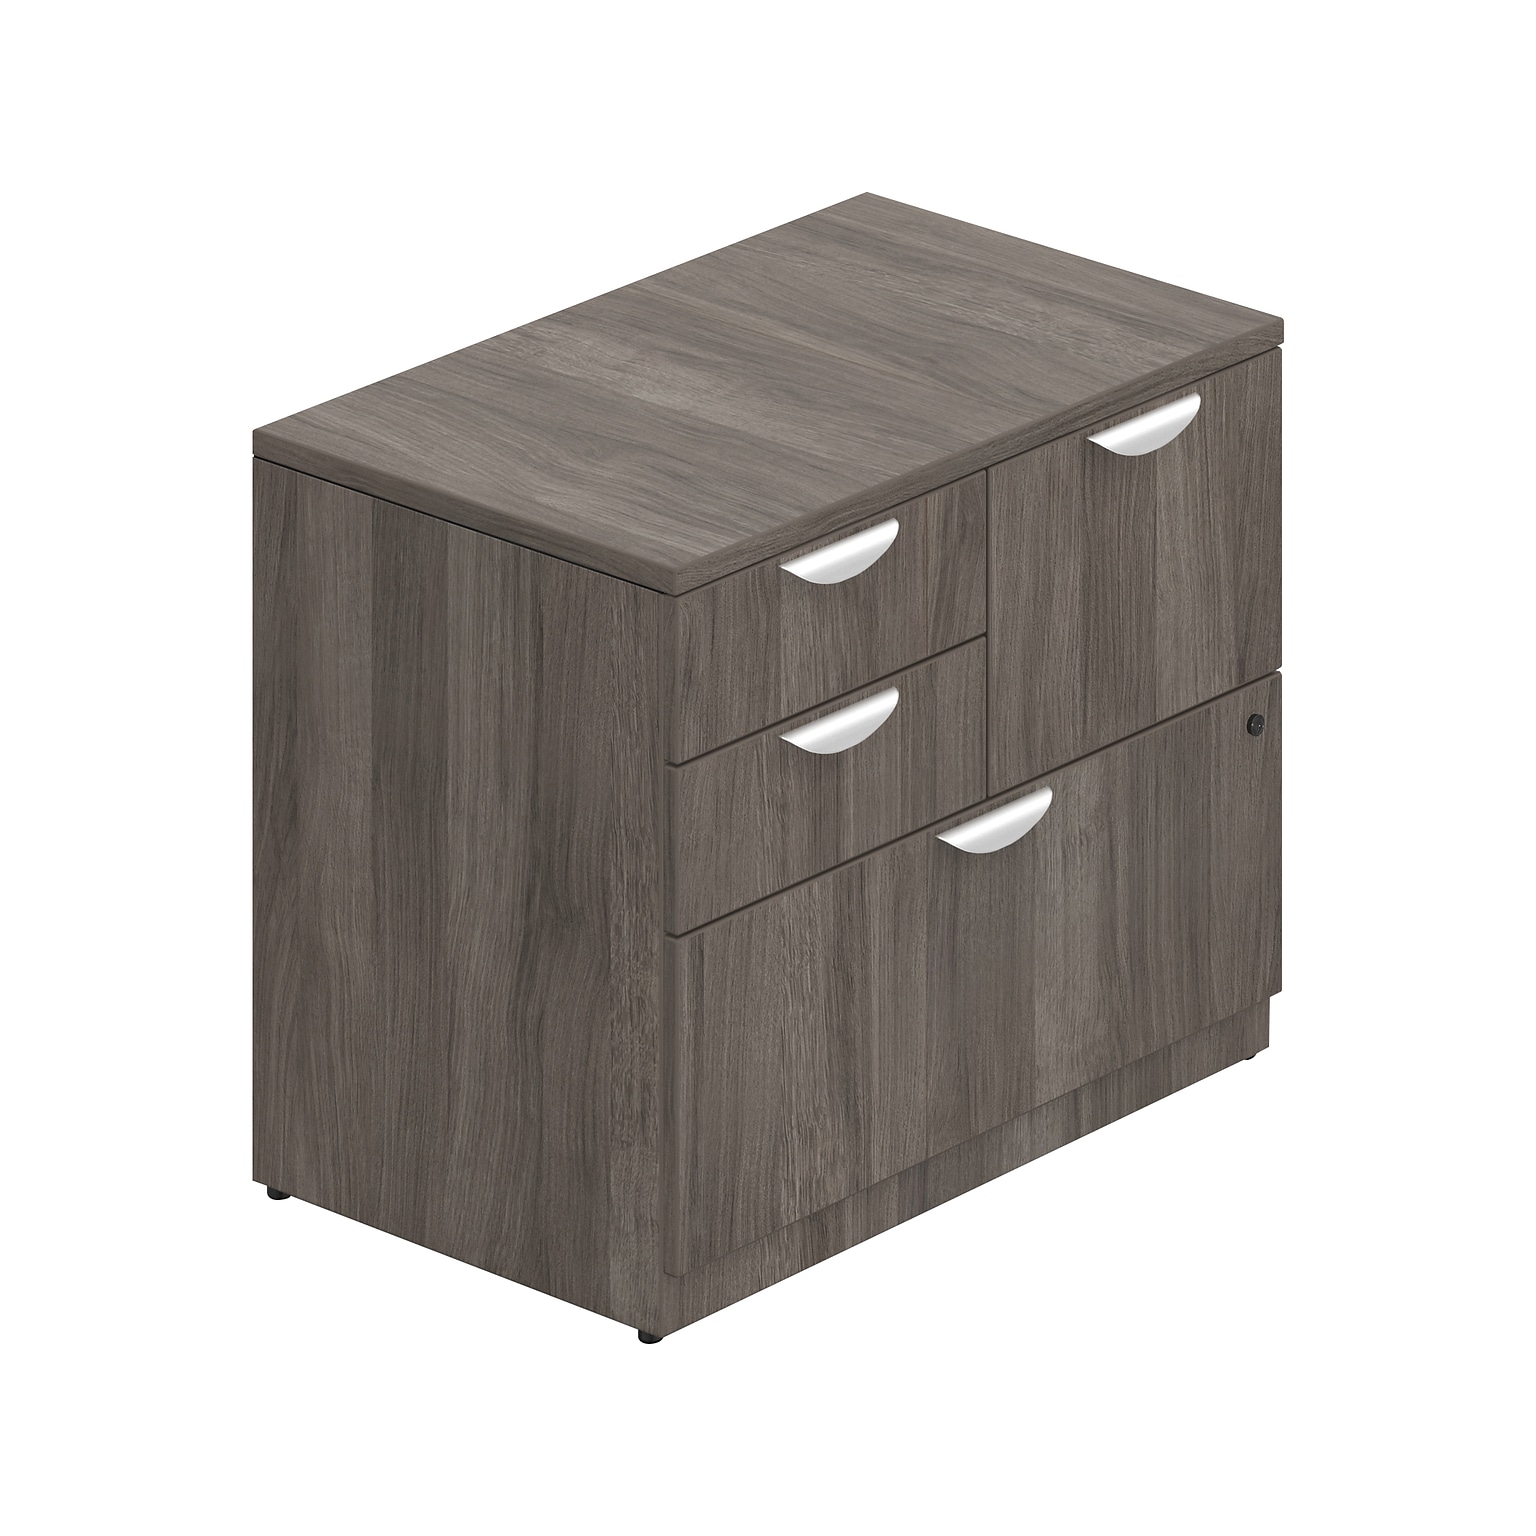 Offices to go 29.5 Laminate Mixed Storage Unit with Lock with 4 shelves, Artisan Gray (TDSL3622MSF-AGL)